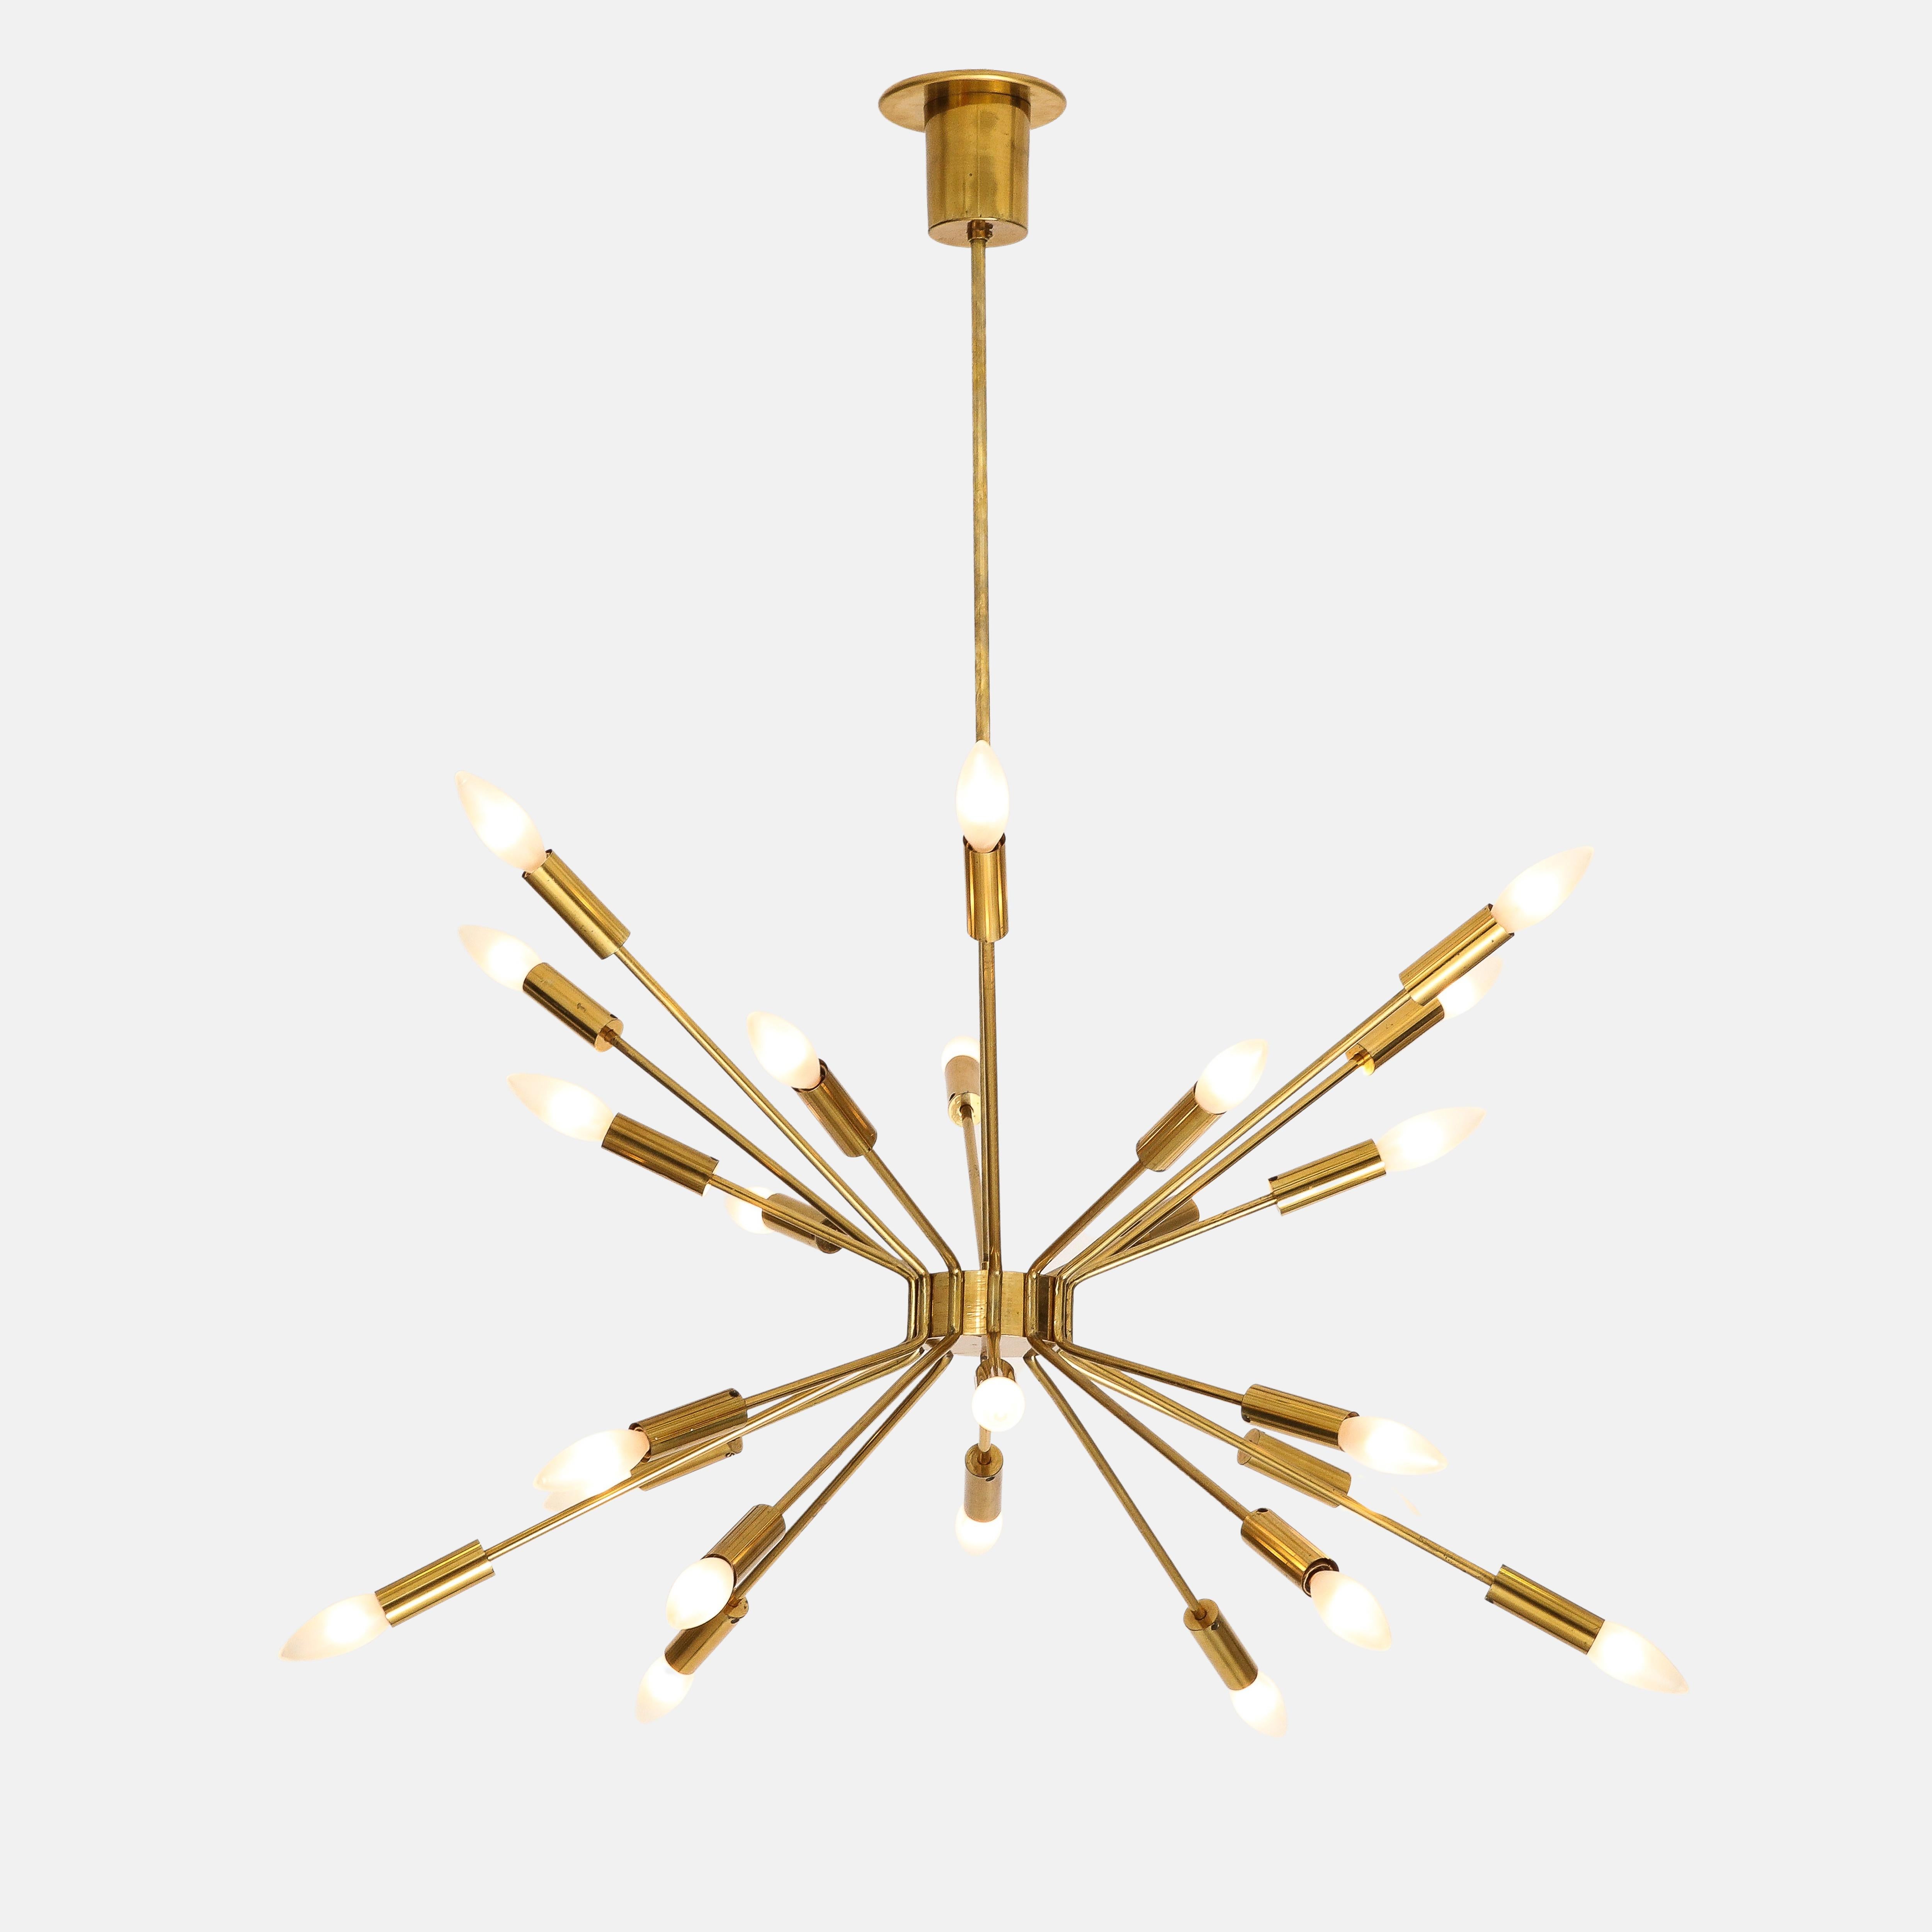 Designed by Gino Sarfatti for Arteluce in 1939, rare 'Fuoco d'artificio' chandelier model 2003 executed in the 1950s, Italy. This 24-light sputnik ceiling light is composed of tubular brass arms which radiate on a brass structure with canopy and